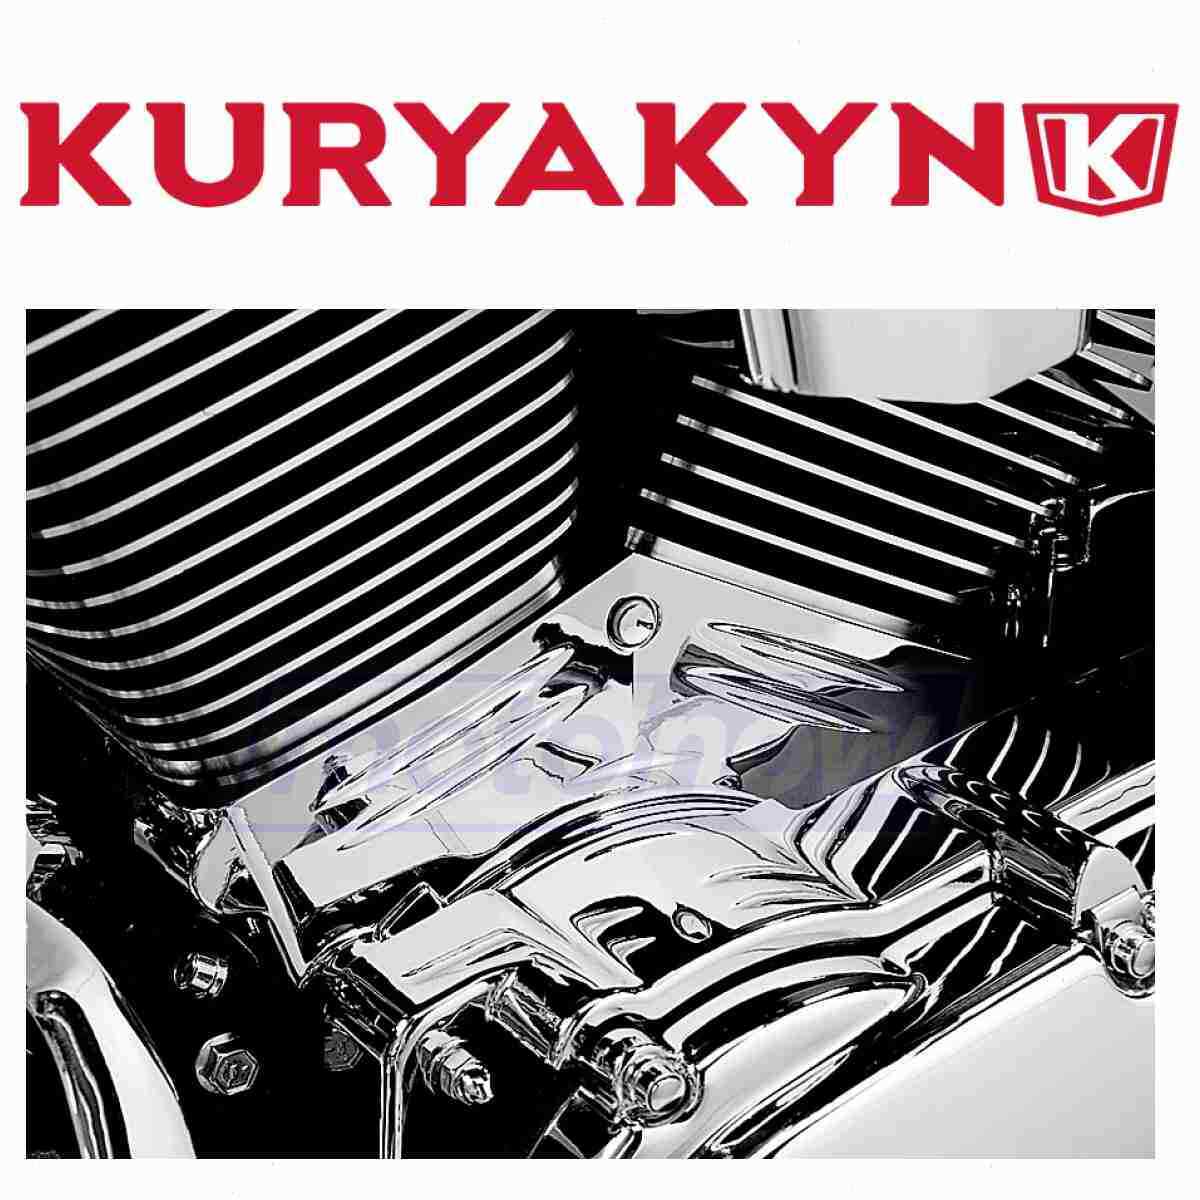 Kuryakyn 8143 Cylinder Base Cover for Engine Engine Covers Case Inserts he